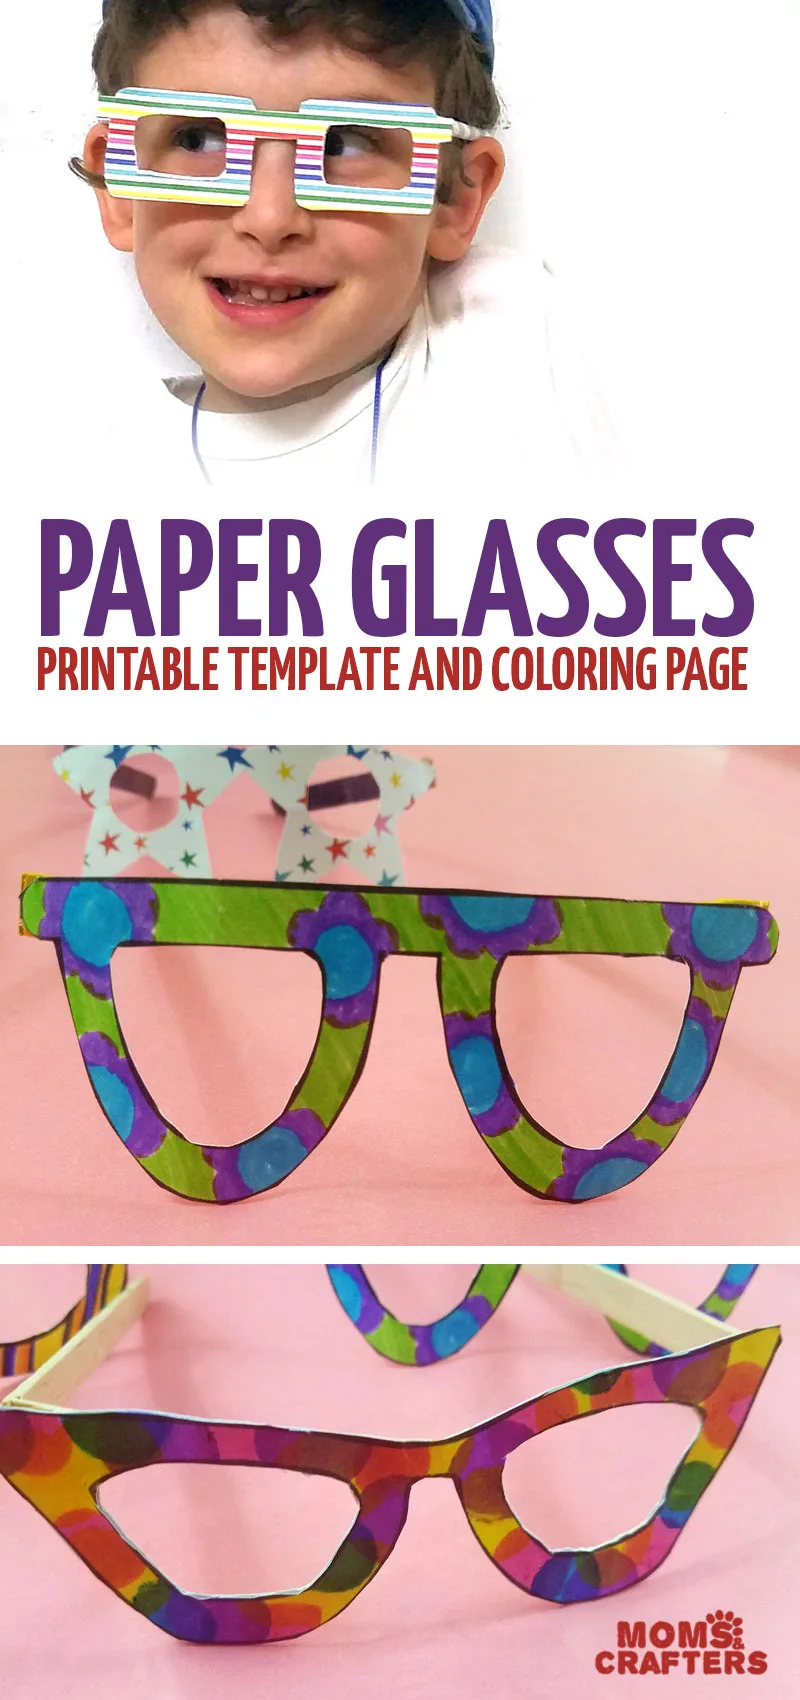 Make your own paper glasses with a printable template! You can use these as a coloring page and color in before crafting or use scrapbook paper to make this fun and funky papercraft for kids. #paper #papercraft #kidscraft